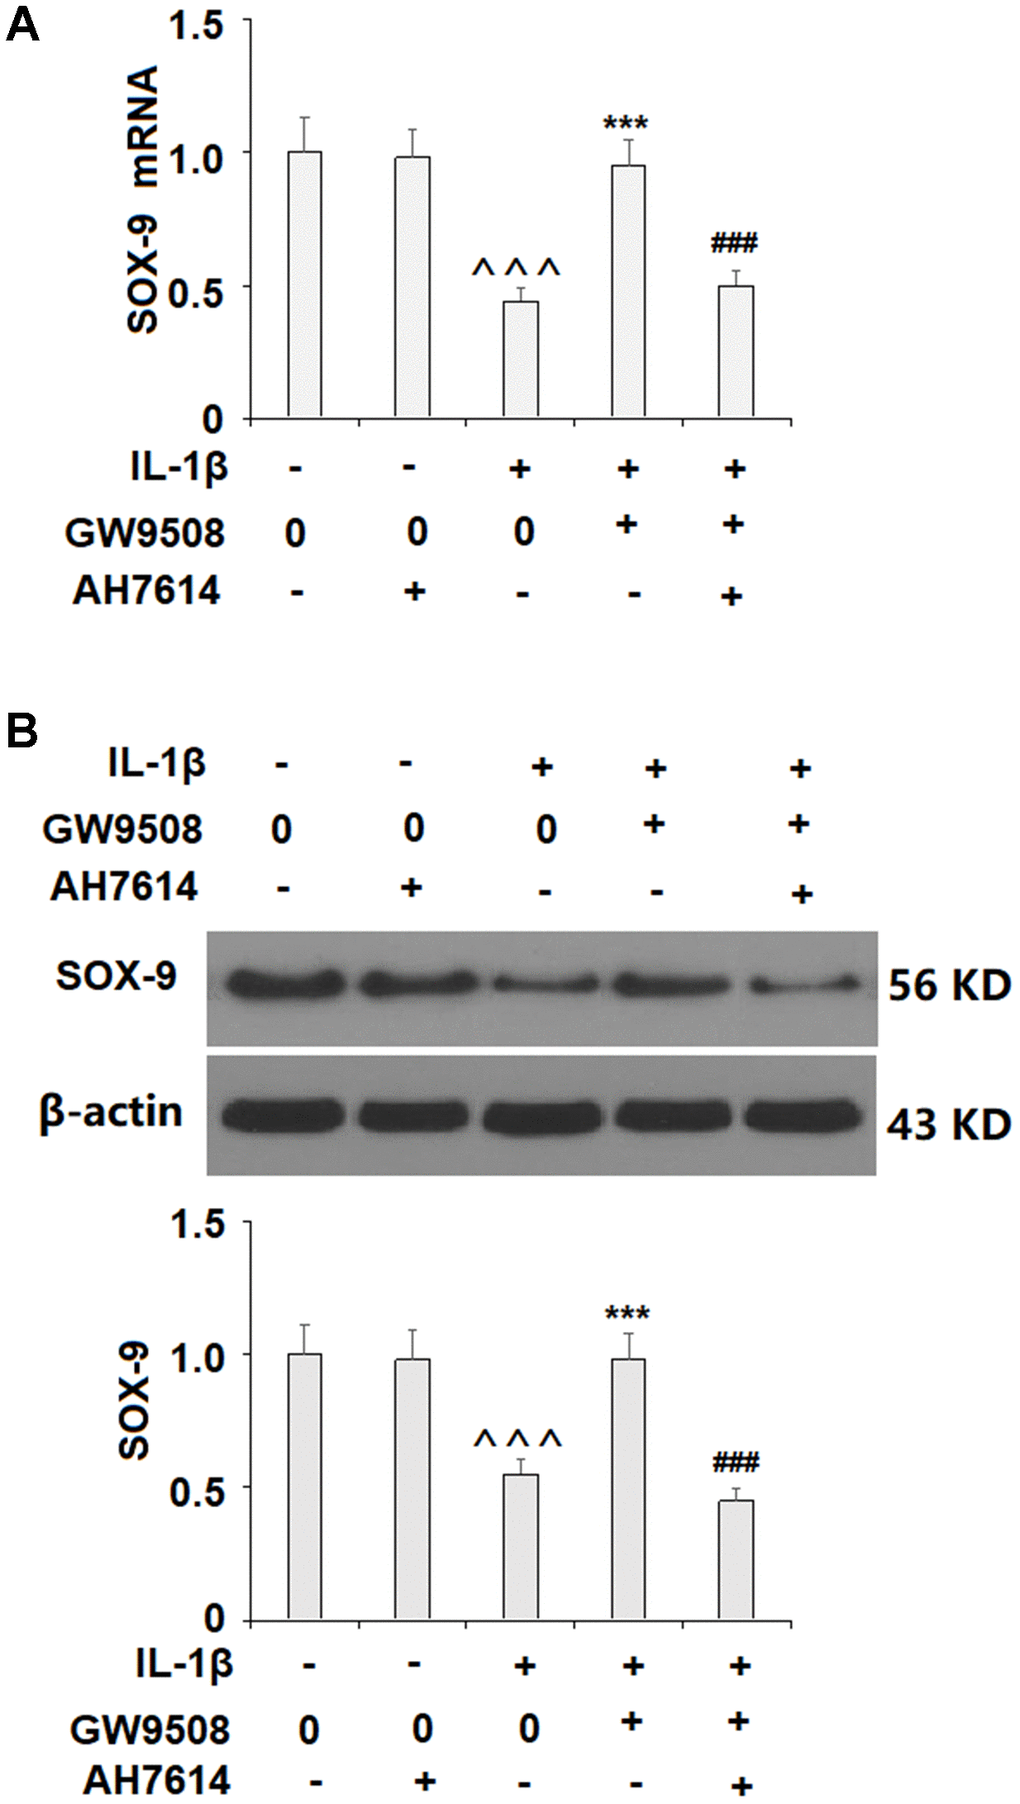 The effects of GW9508 on abolishing IL-1β-induced decreased SOX9 expression are dependent on GPR120. Cells were treated with IL-1β (10 ng/ml) with or without GW9508 (50 μM) or the GPR120 antagonist AH7614 (1 μM) for 24 h. (A) mRNA of SOX-9; (B) Protein of SOX-9 (^^^, P